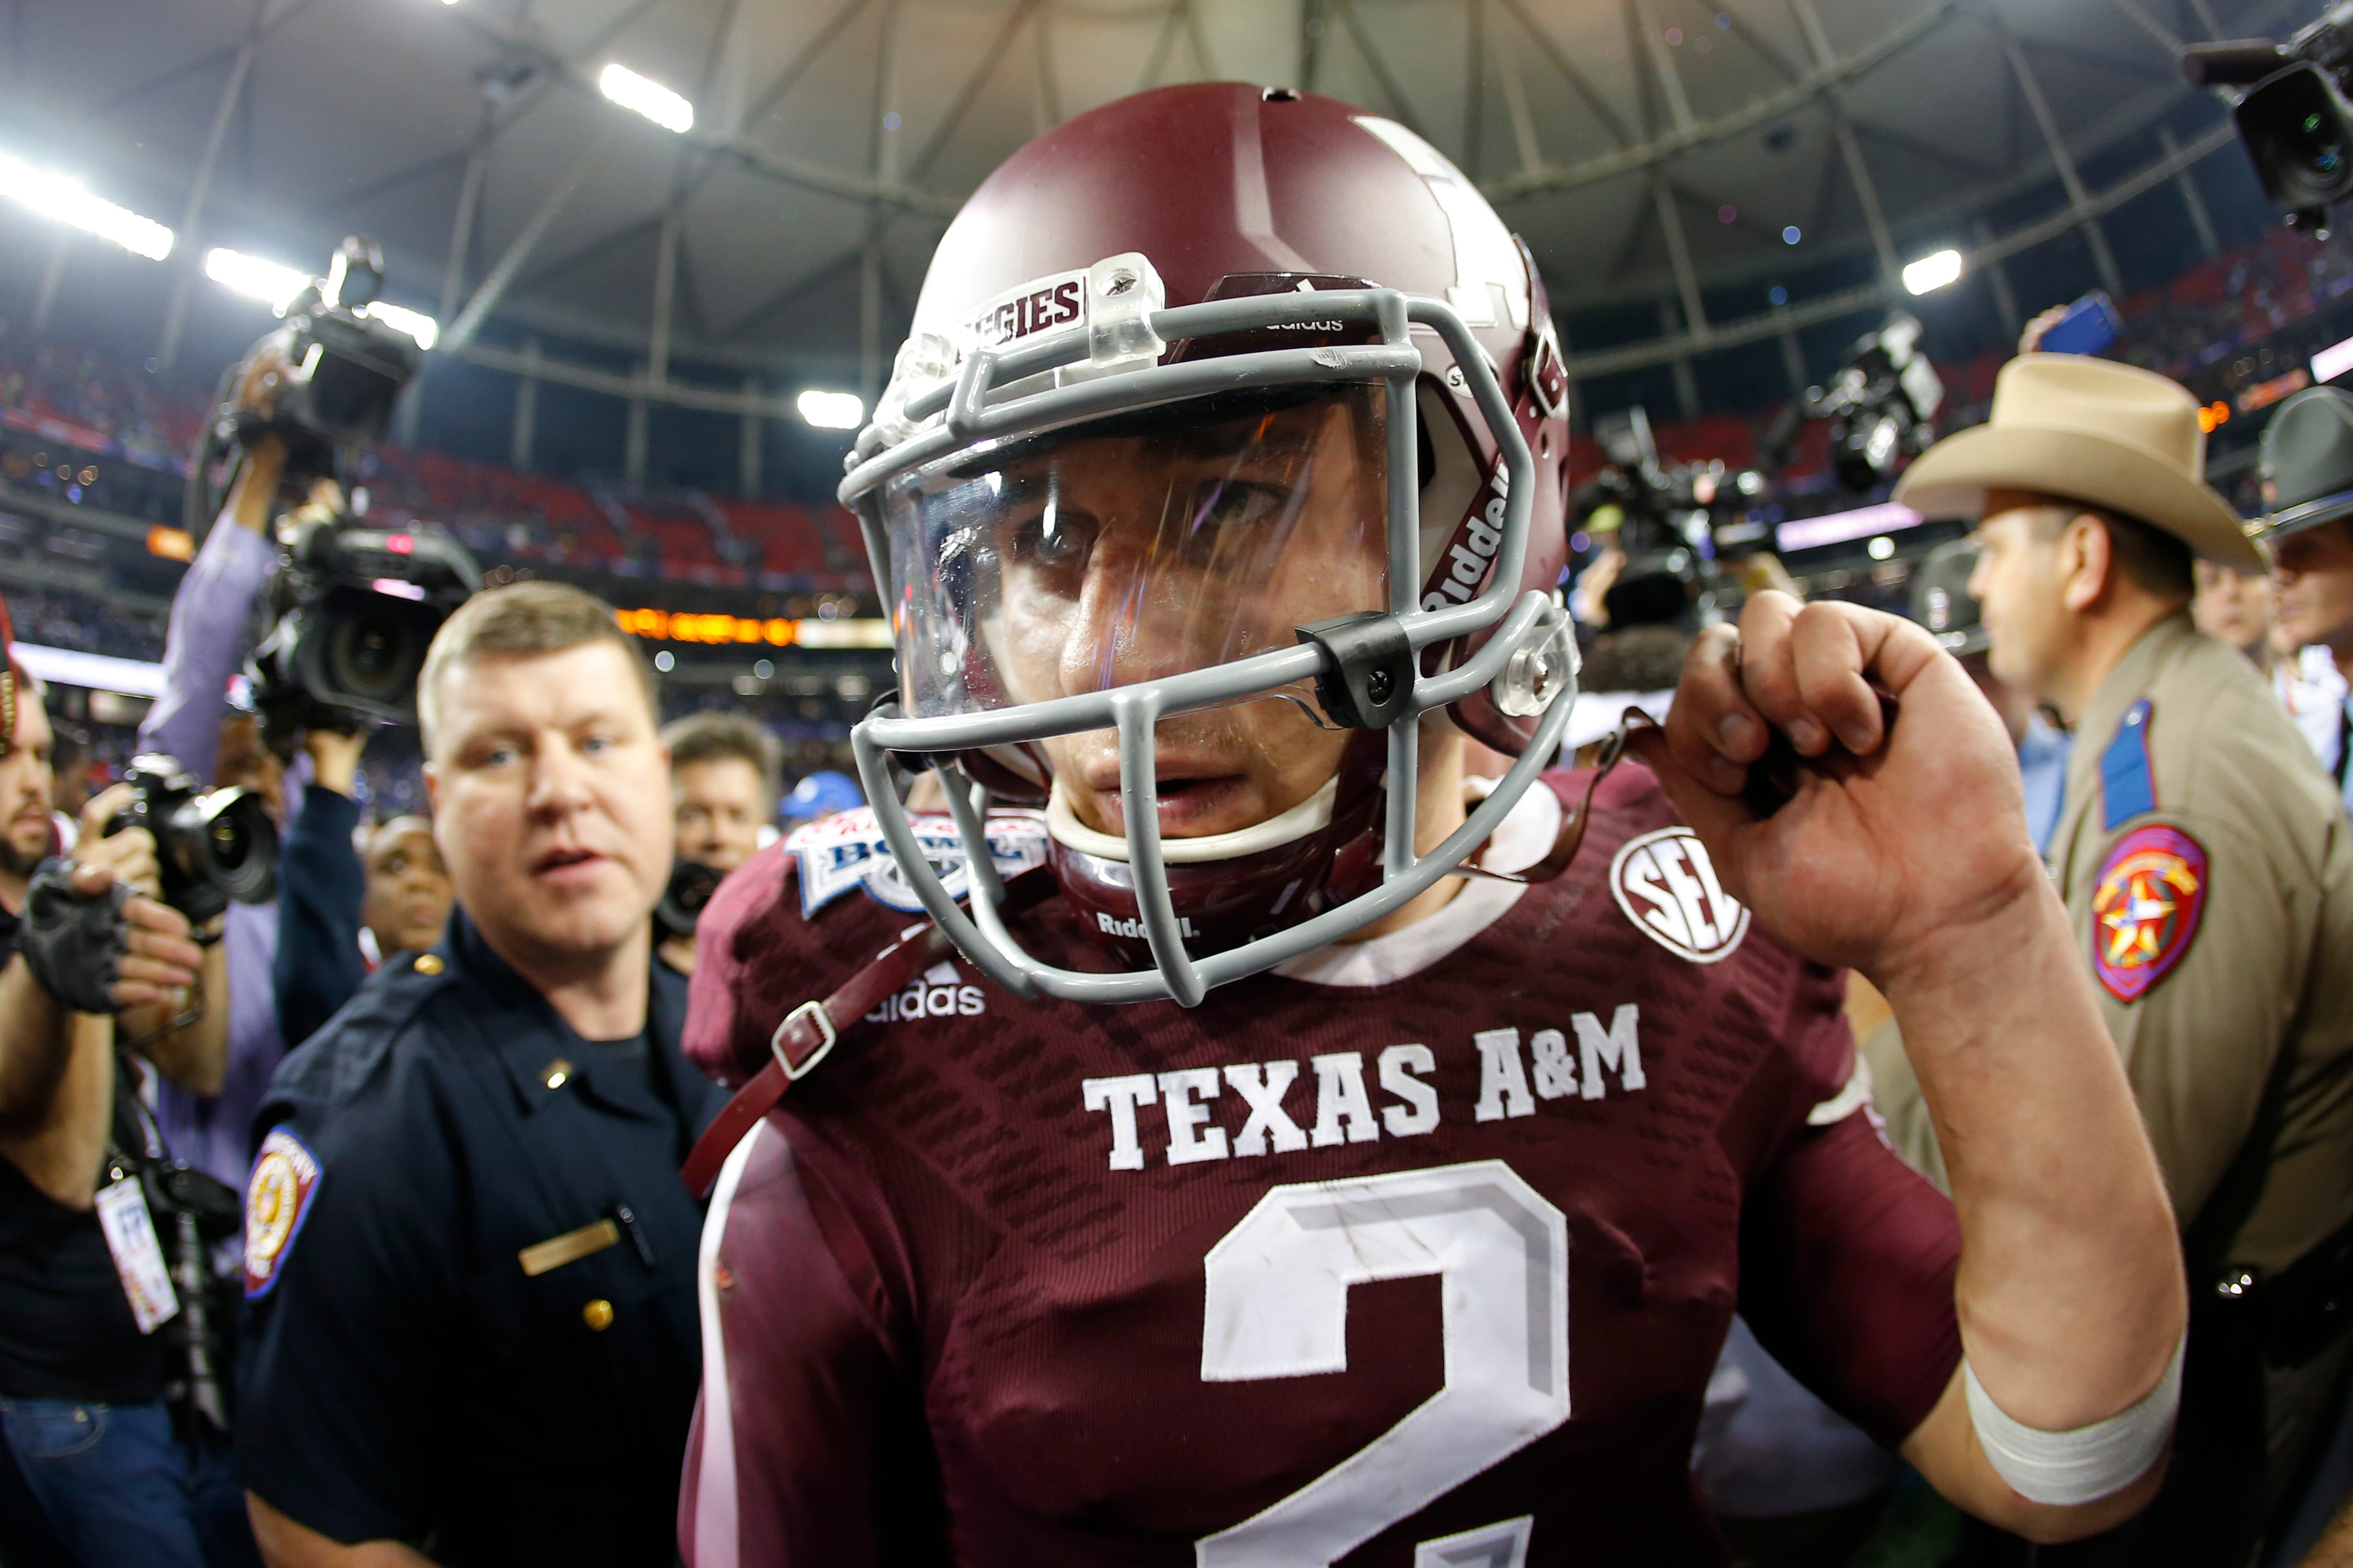 'It's on the rise': Texas A&M great Johnny Manziel on program's future